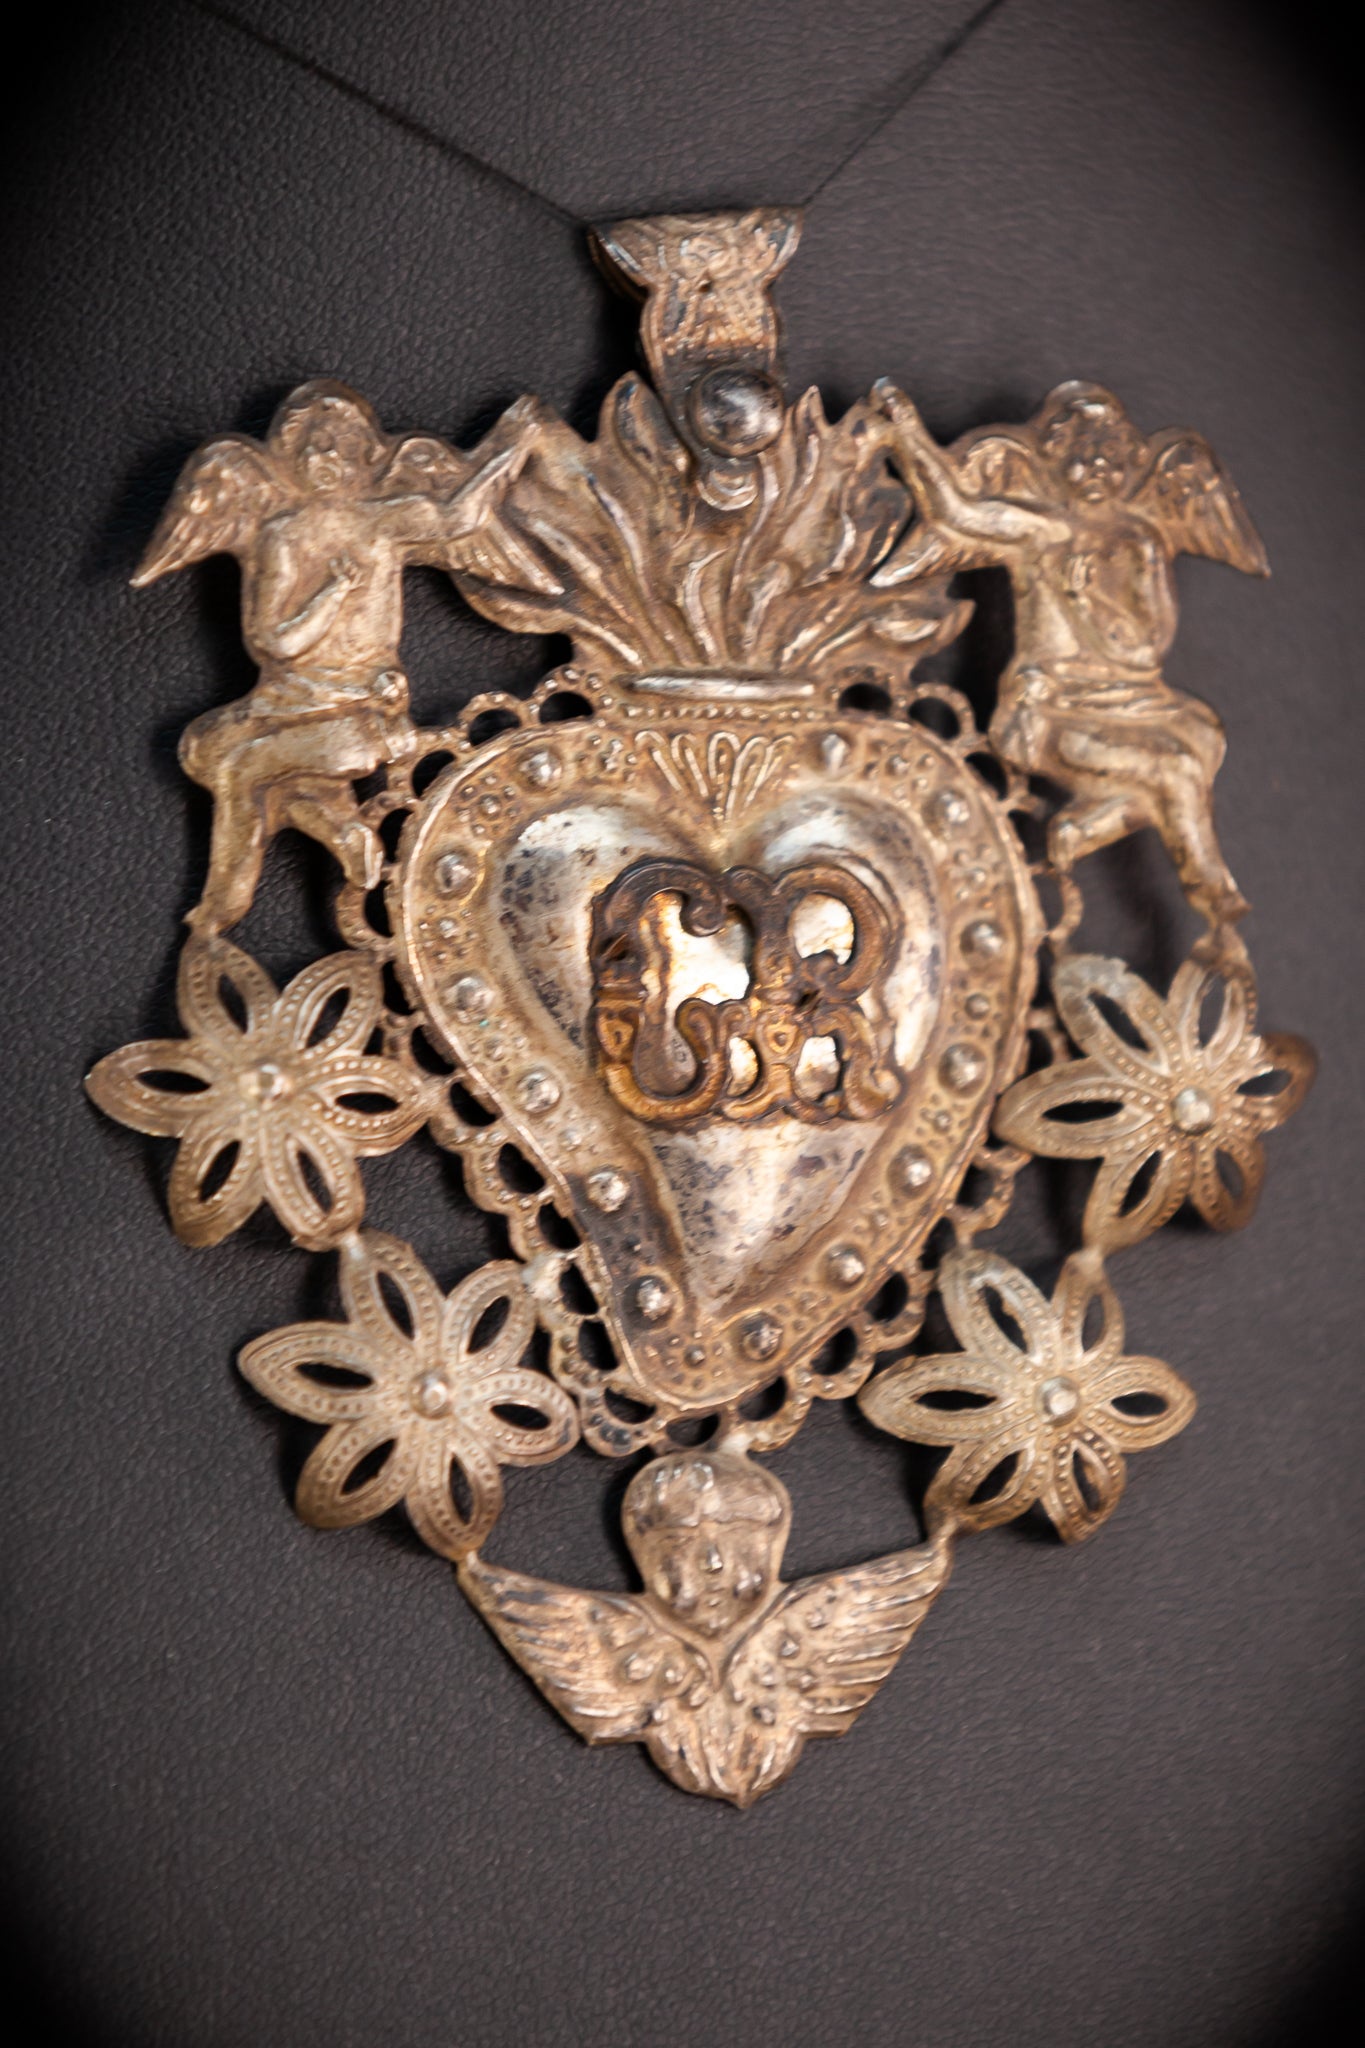 Solid Silver Votive Heart | 1800s Grace Received 3.7"